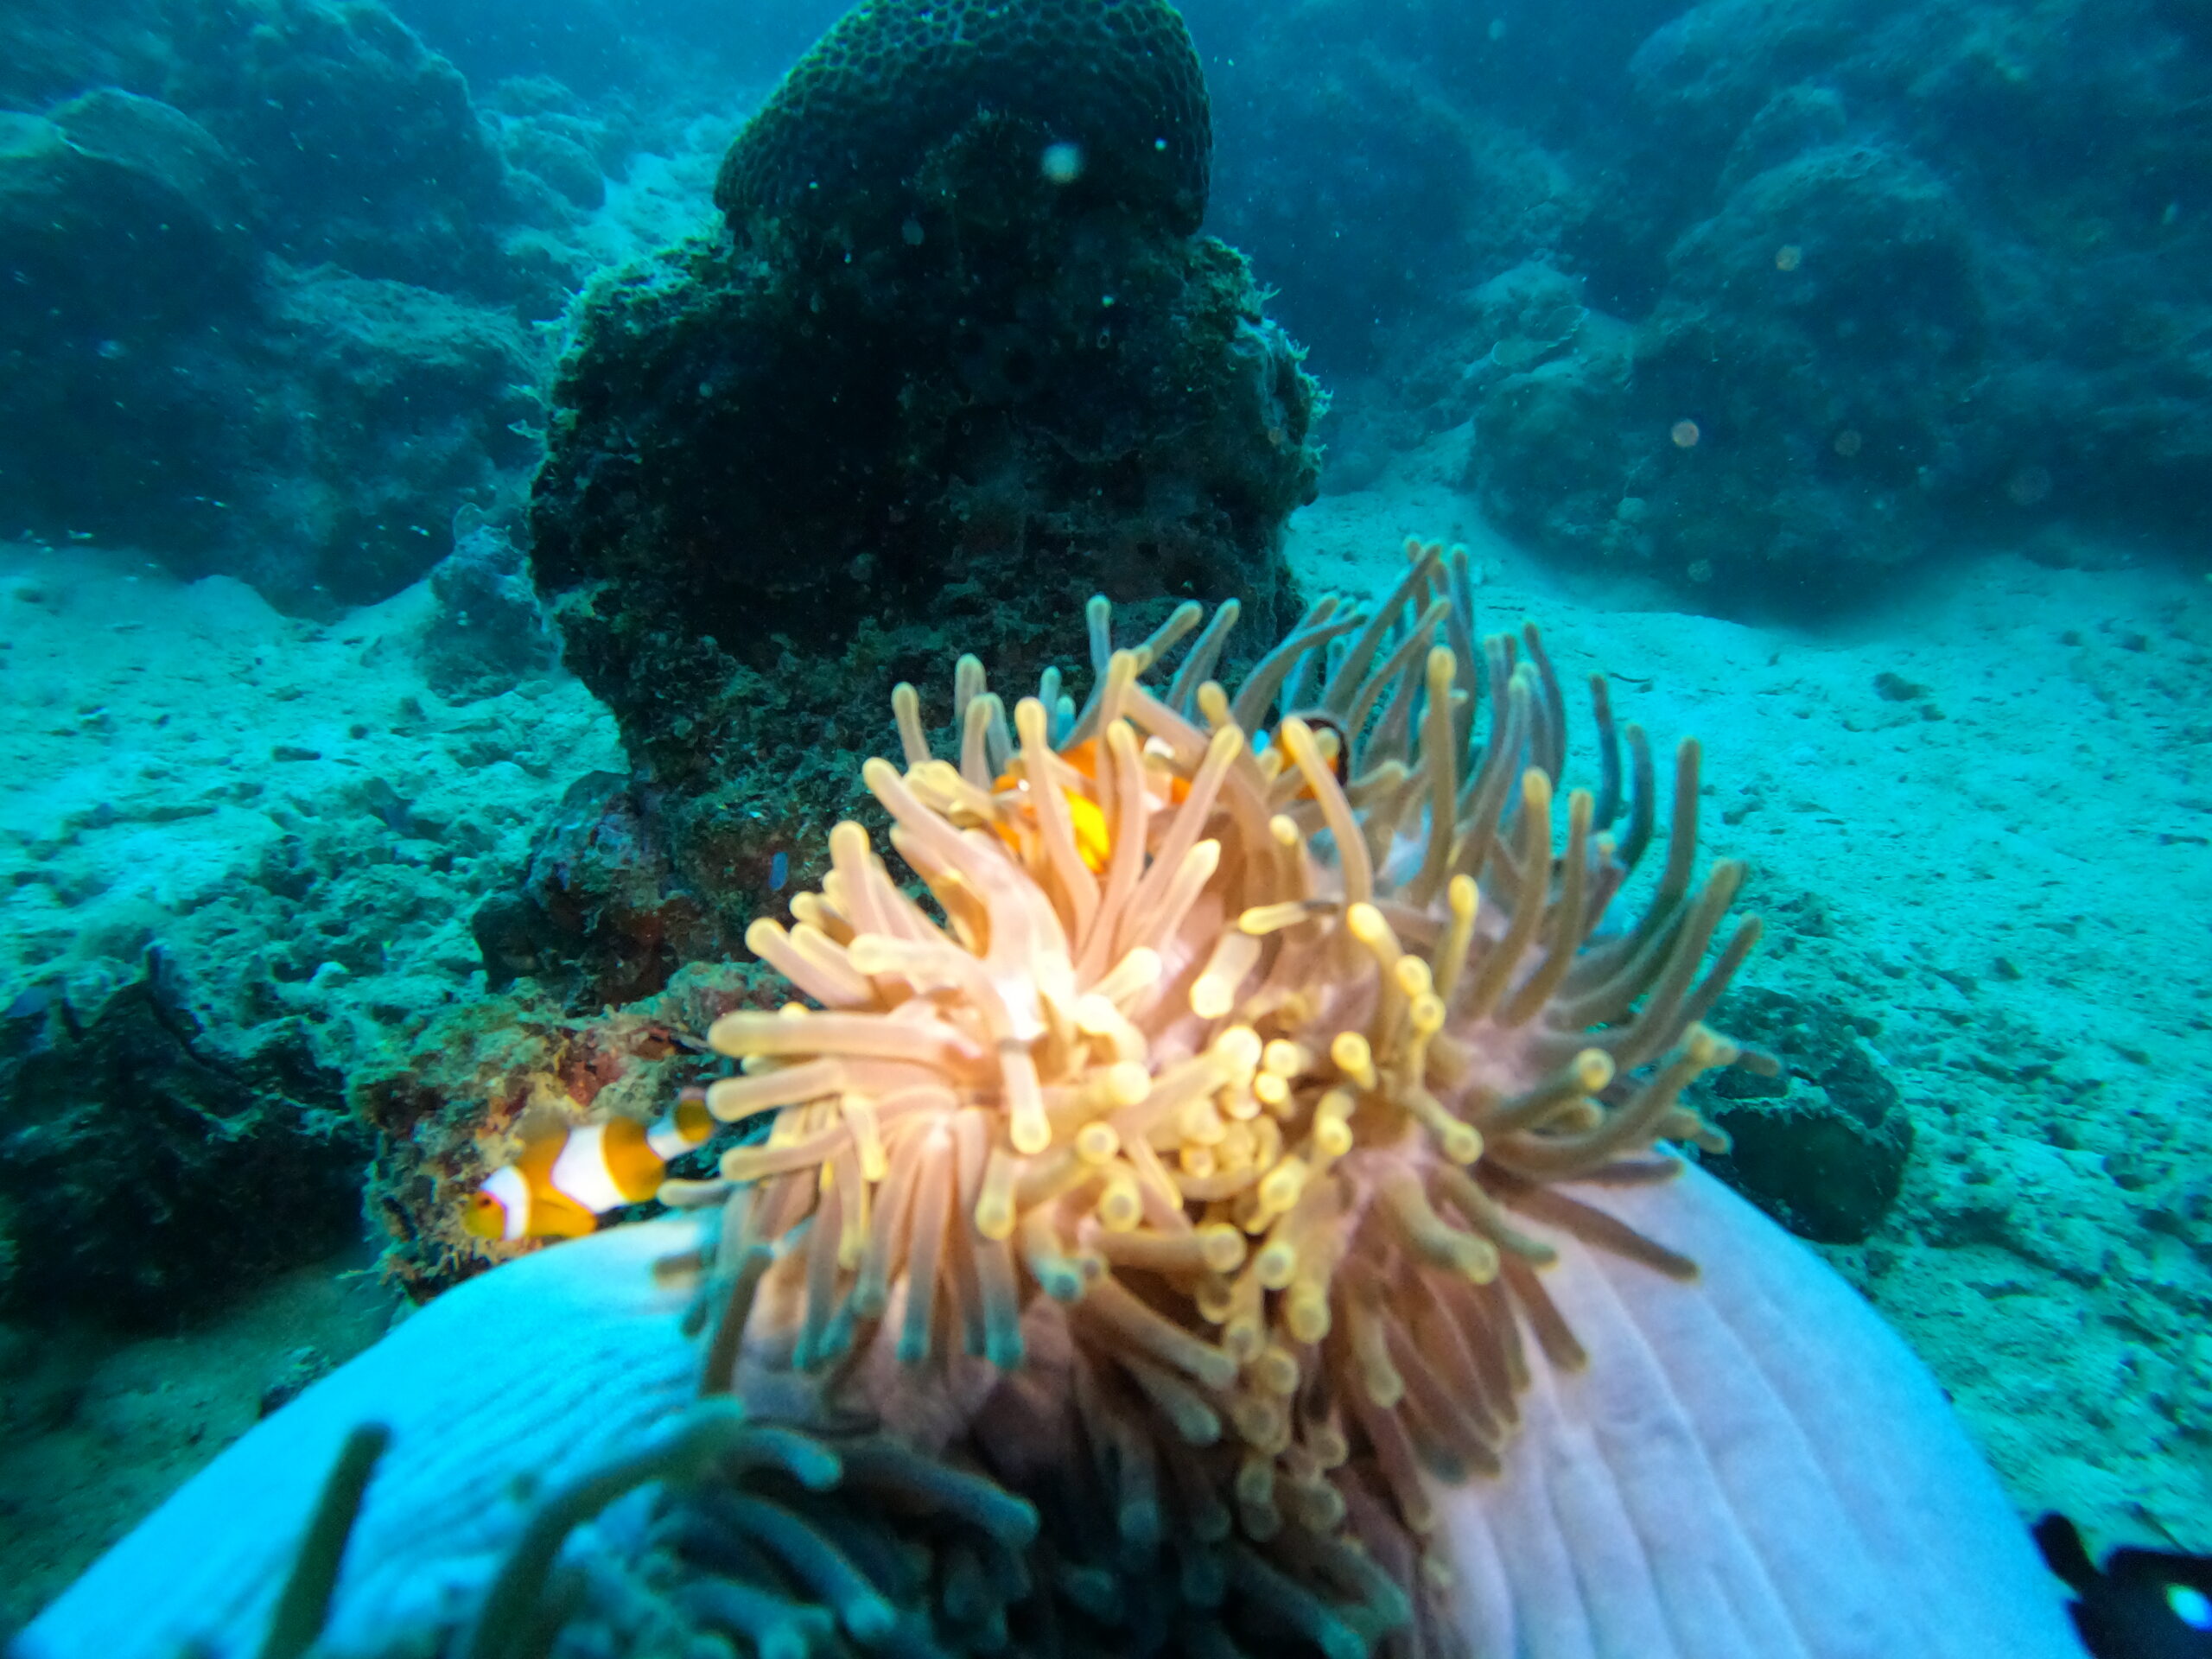 underwater Sea anemone surrounded by hard corals | deep dive sites on Havelock Island